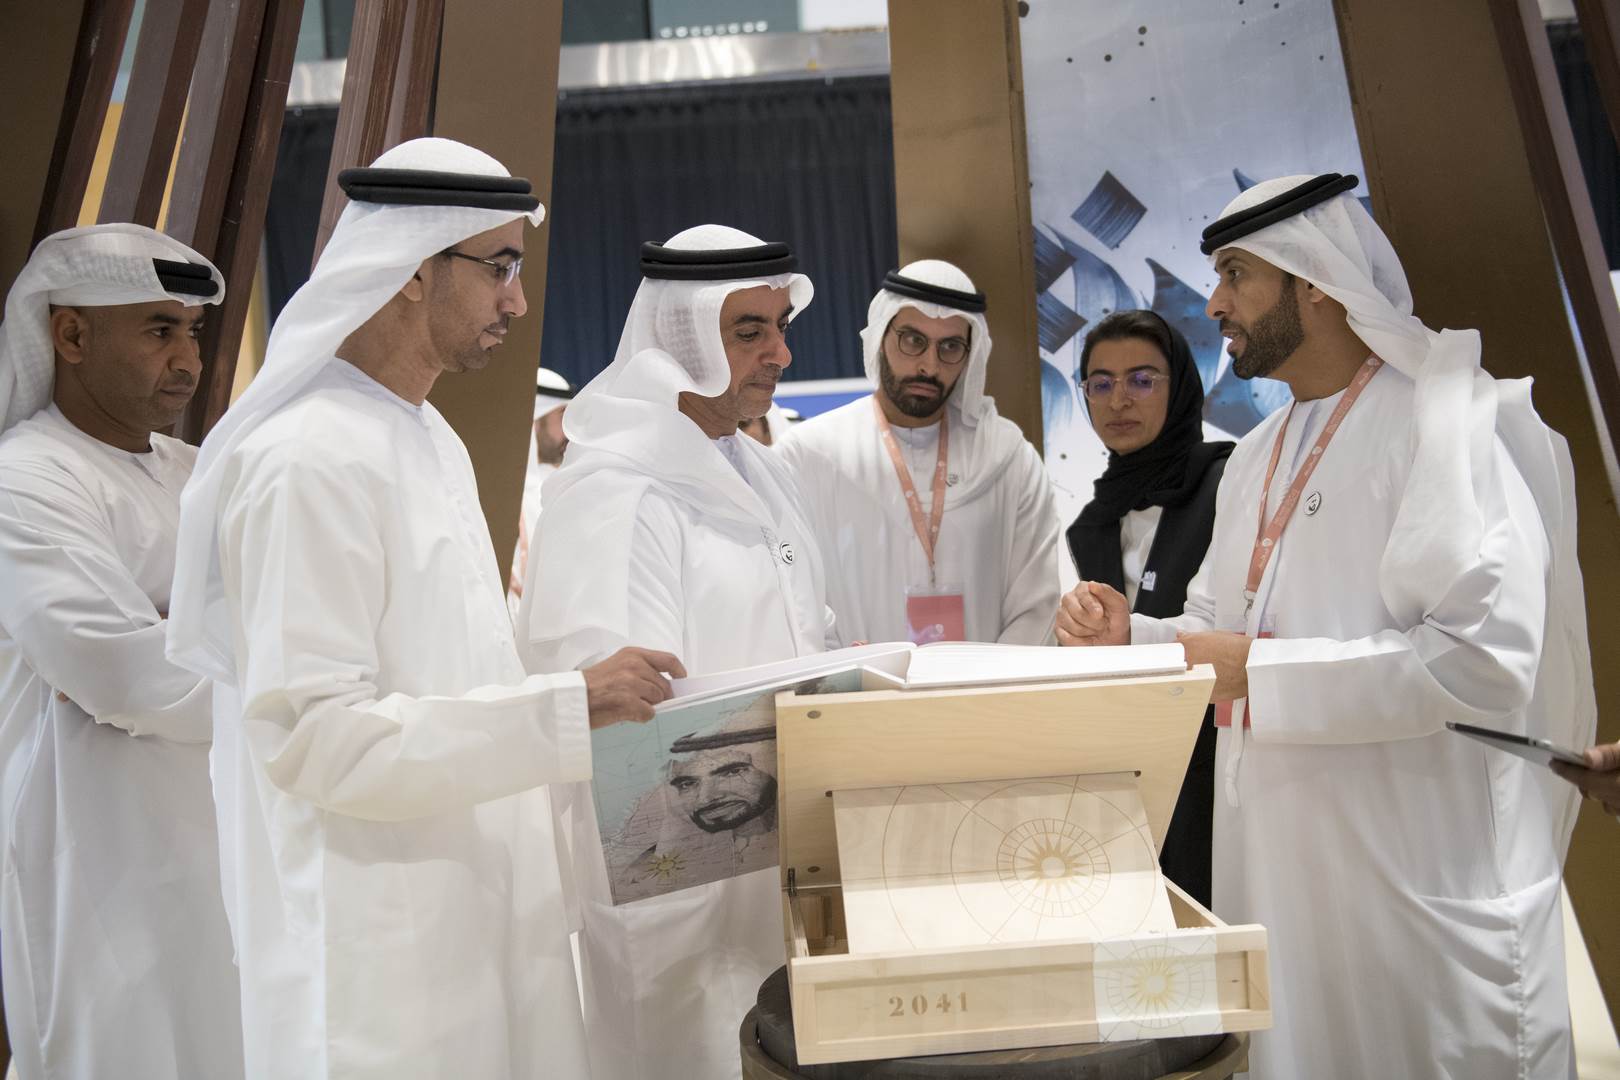 The 29th edition of Abu Dhabi International Book Fair (ADIBF) opens its doors to the public